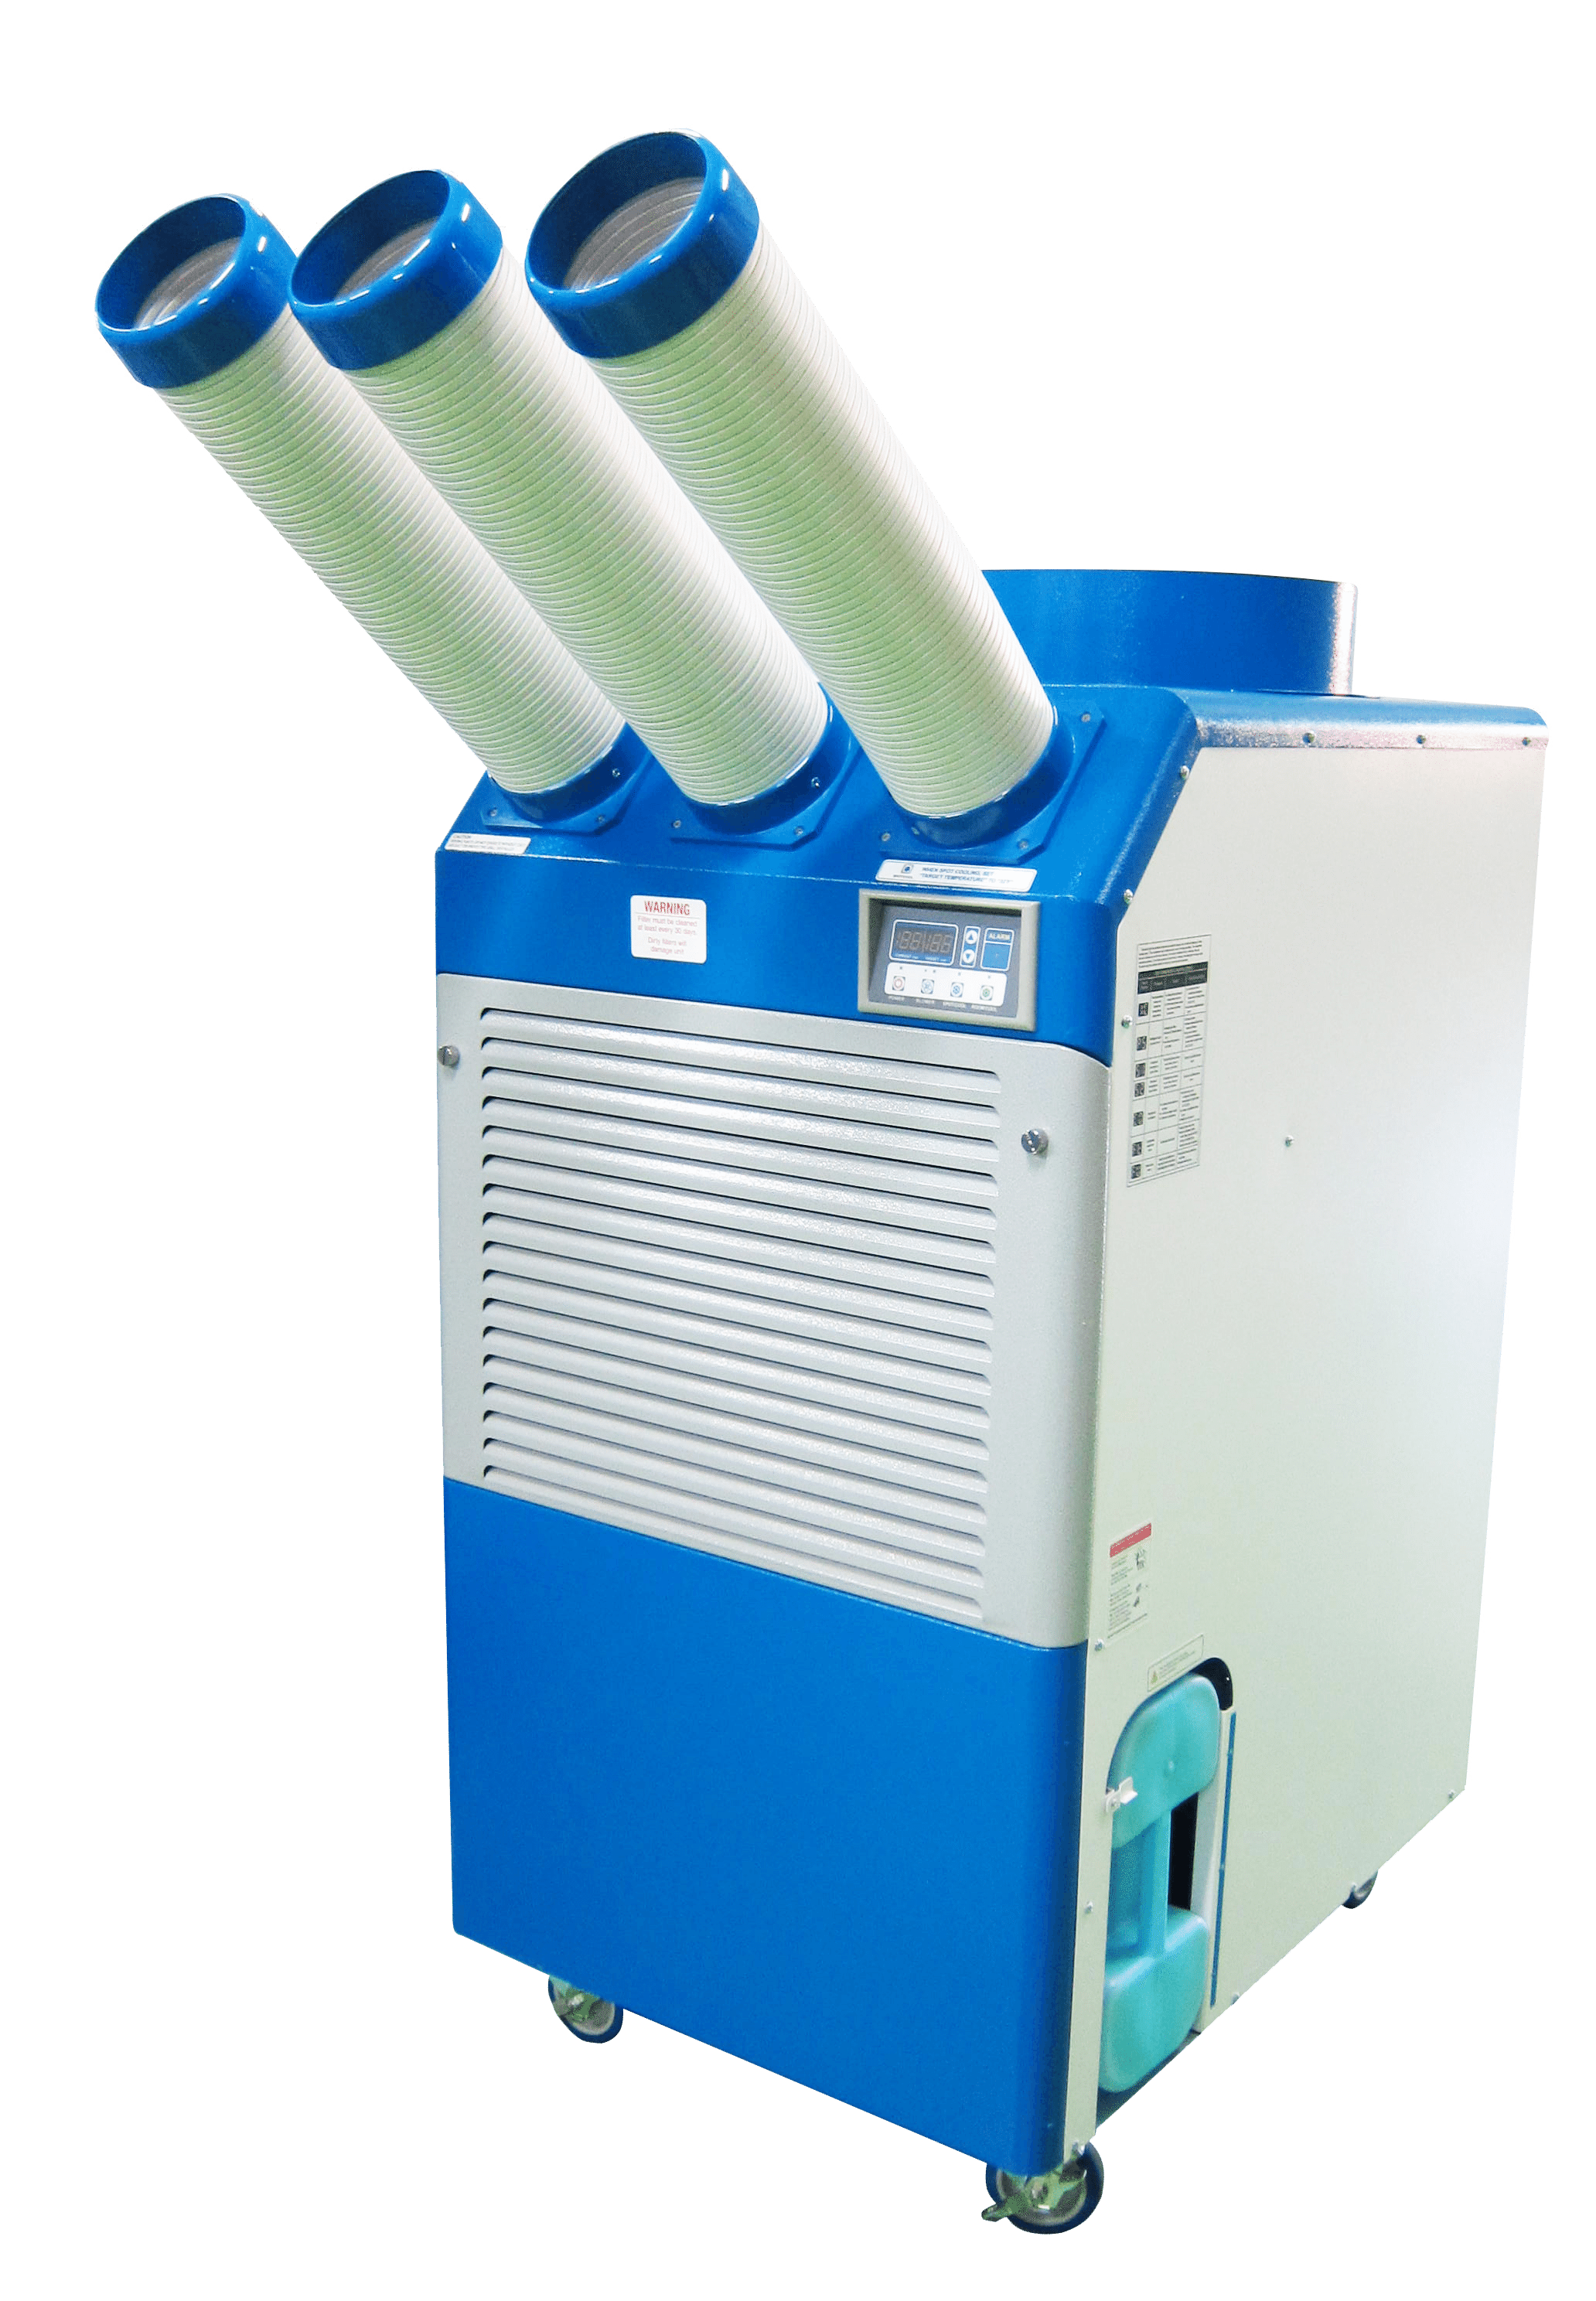 PORTABLE AIR CONDITIONER 9.4KW / Industrial Heating Cooling Ventilation Distribution Fans Warehouse Australia / Fanmaster